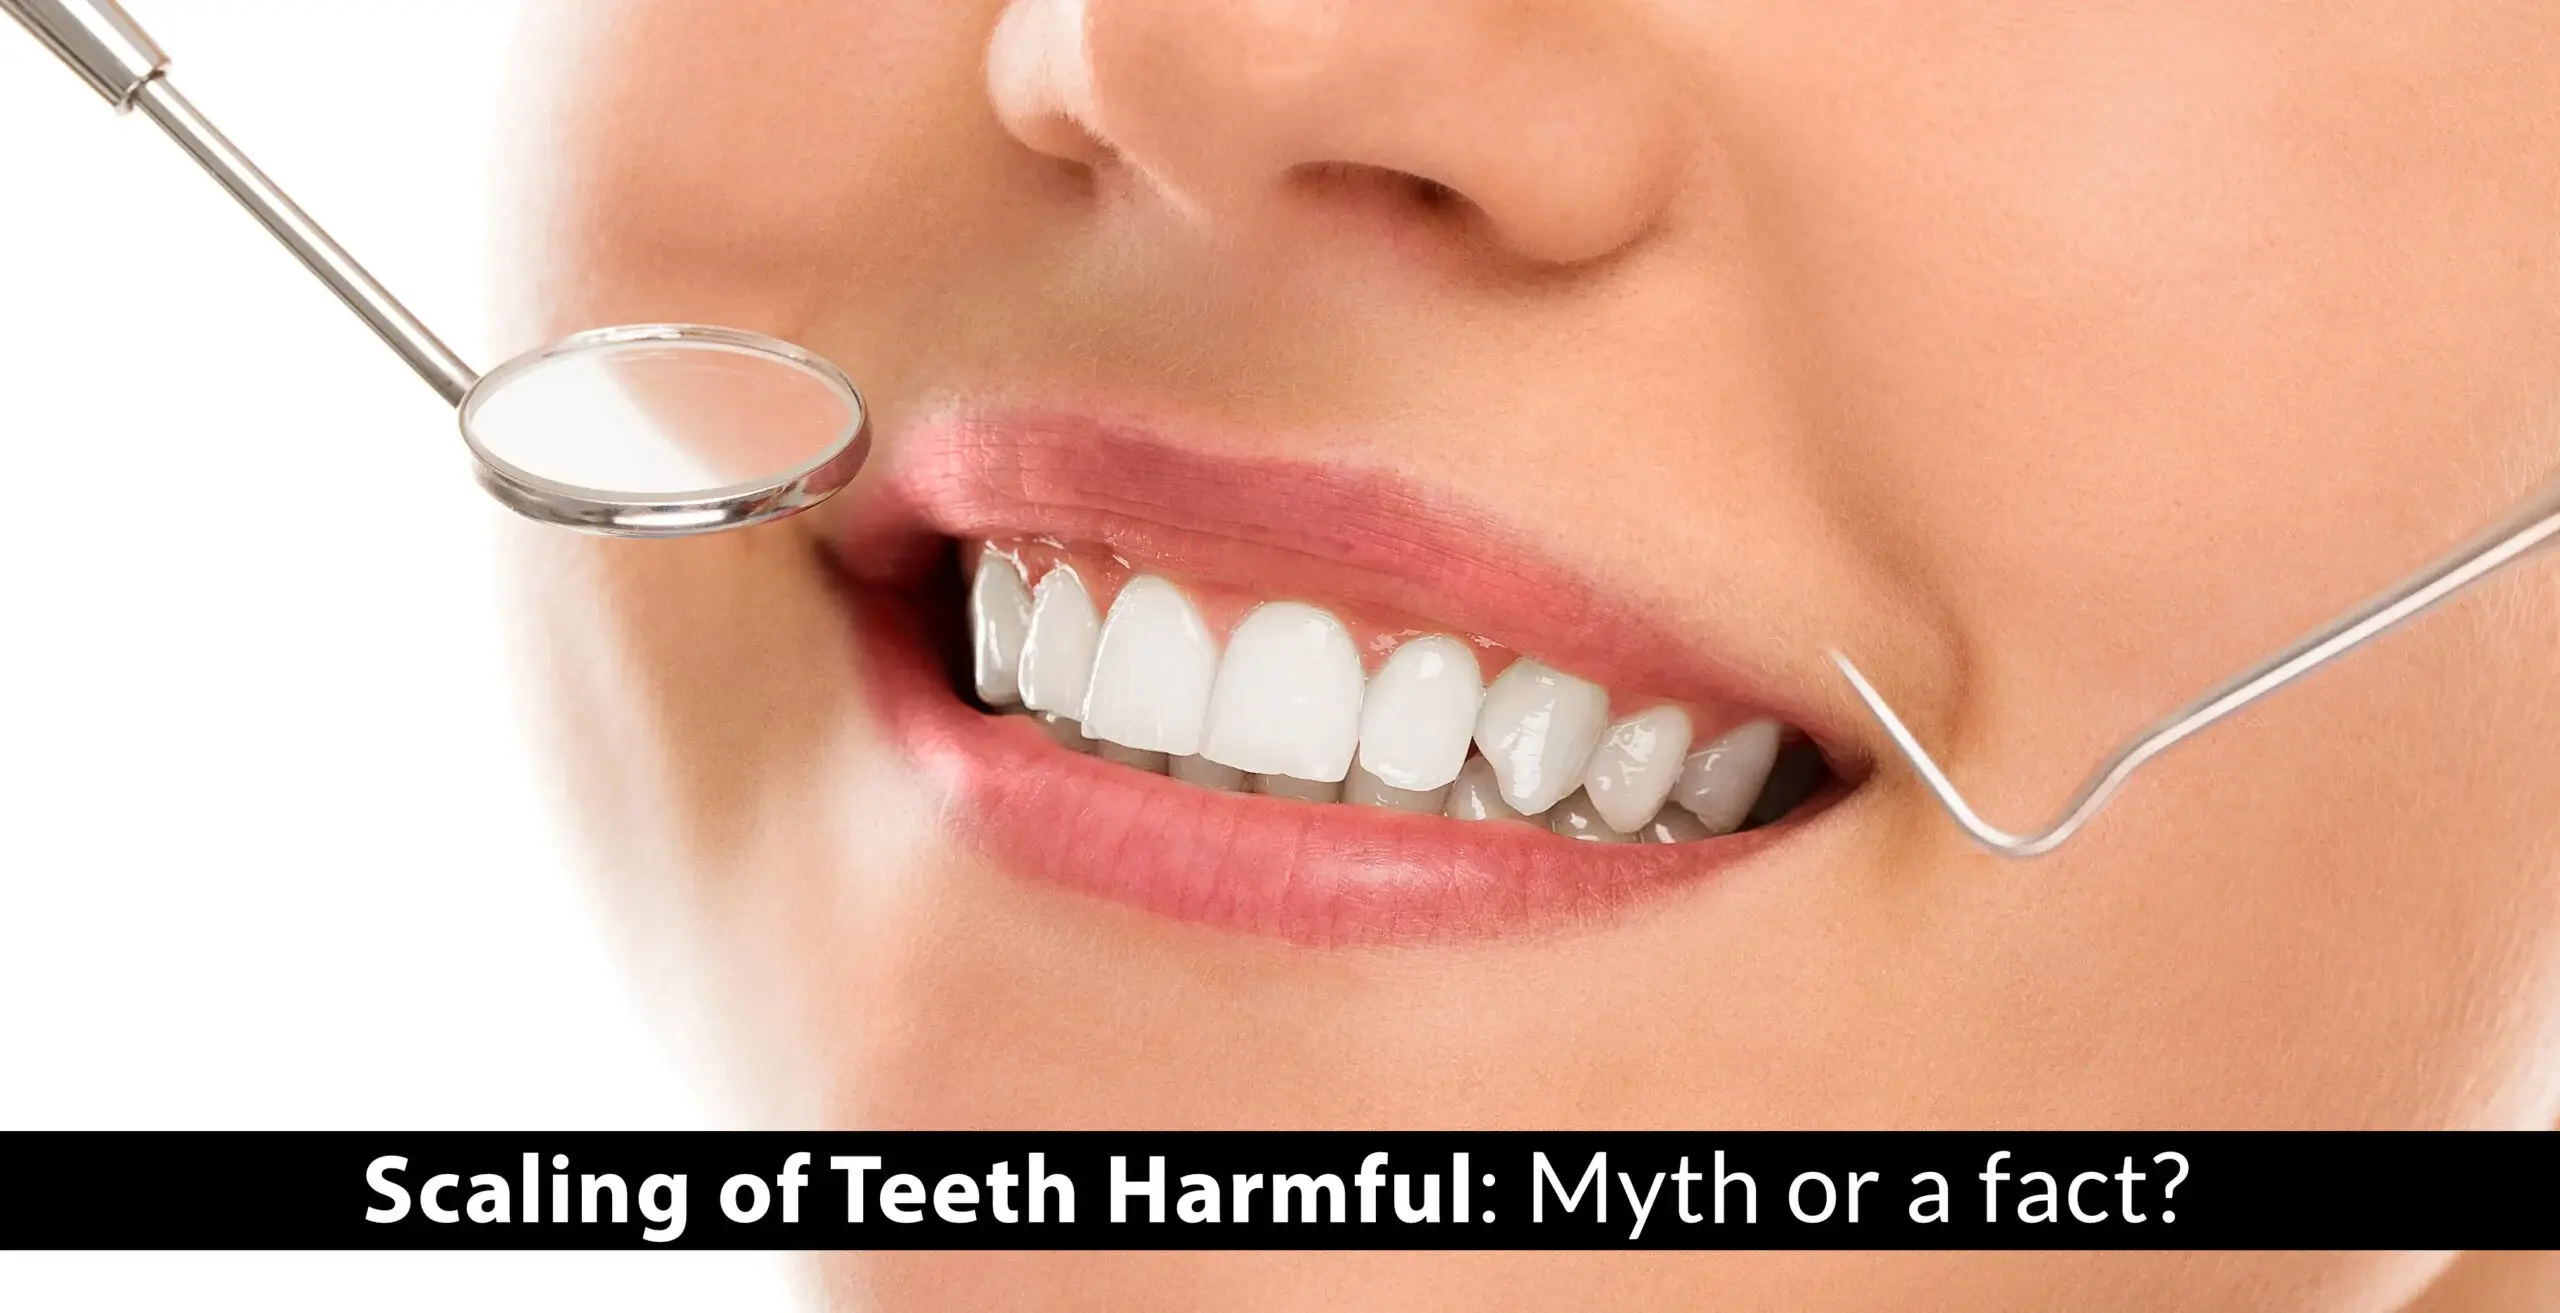 https://www.miracleshealth.com/assets/blog/assets/uploads/blog/Scaling of Teeth Harmful Myth or a fact